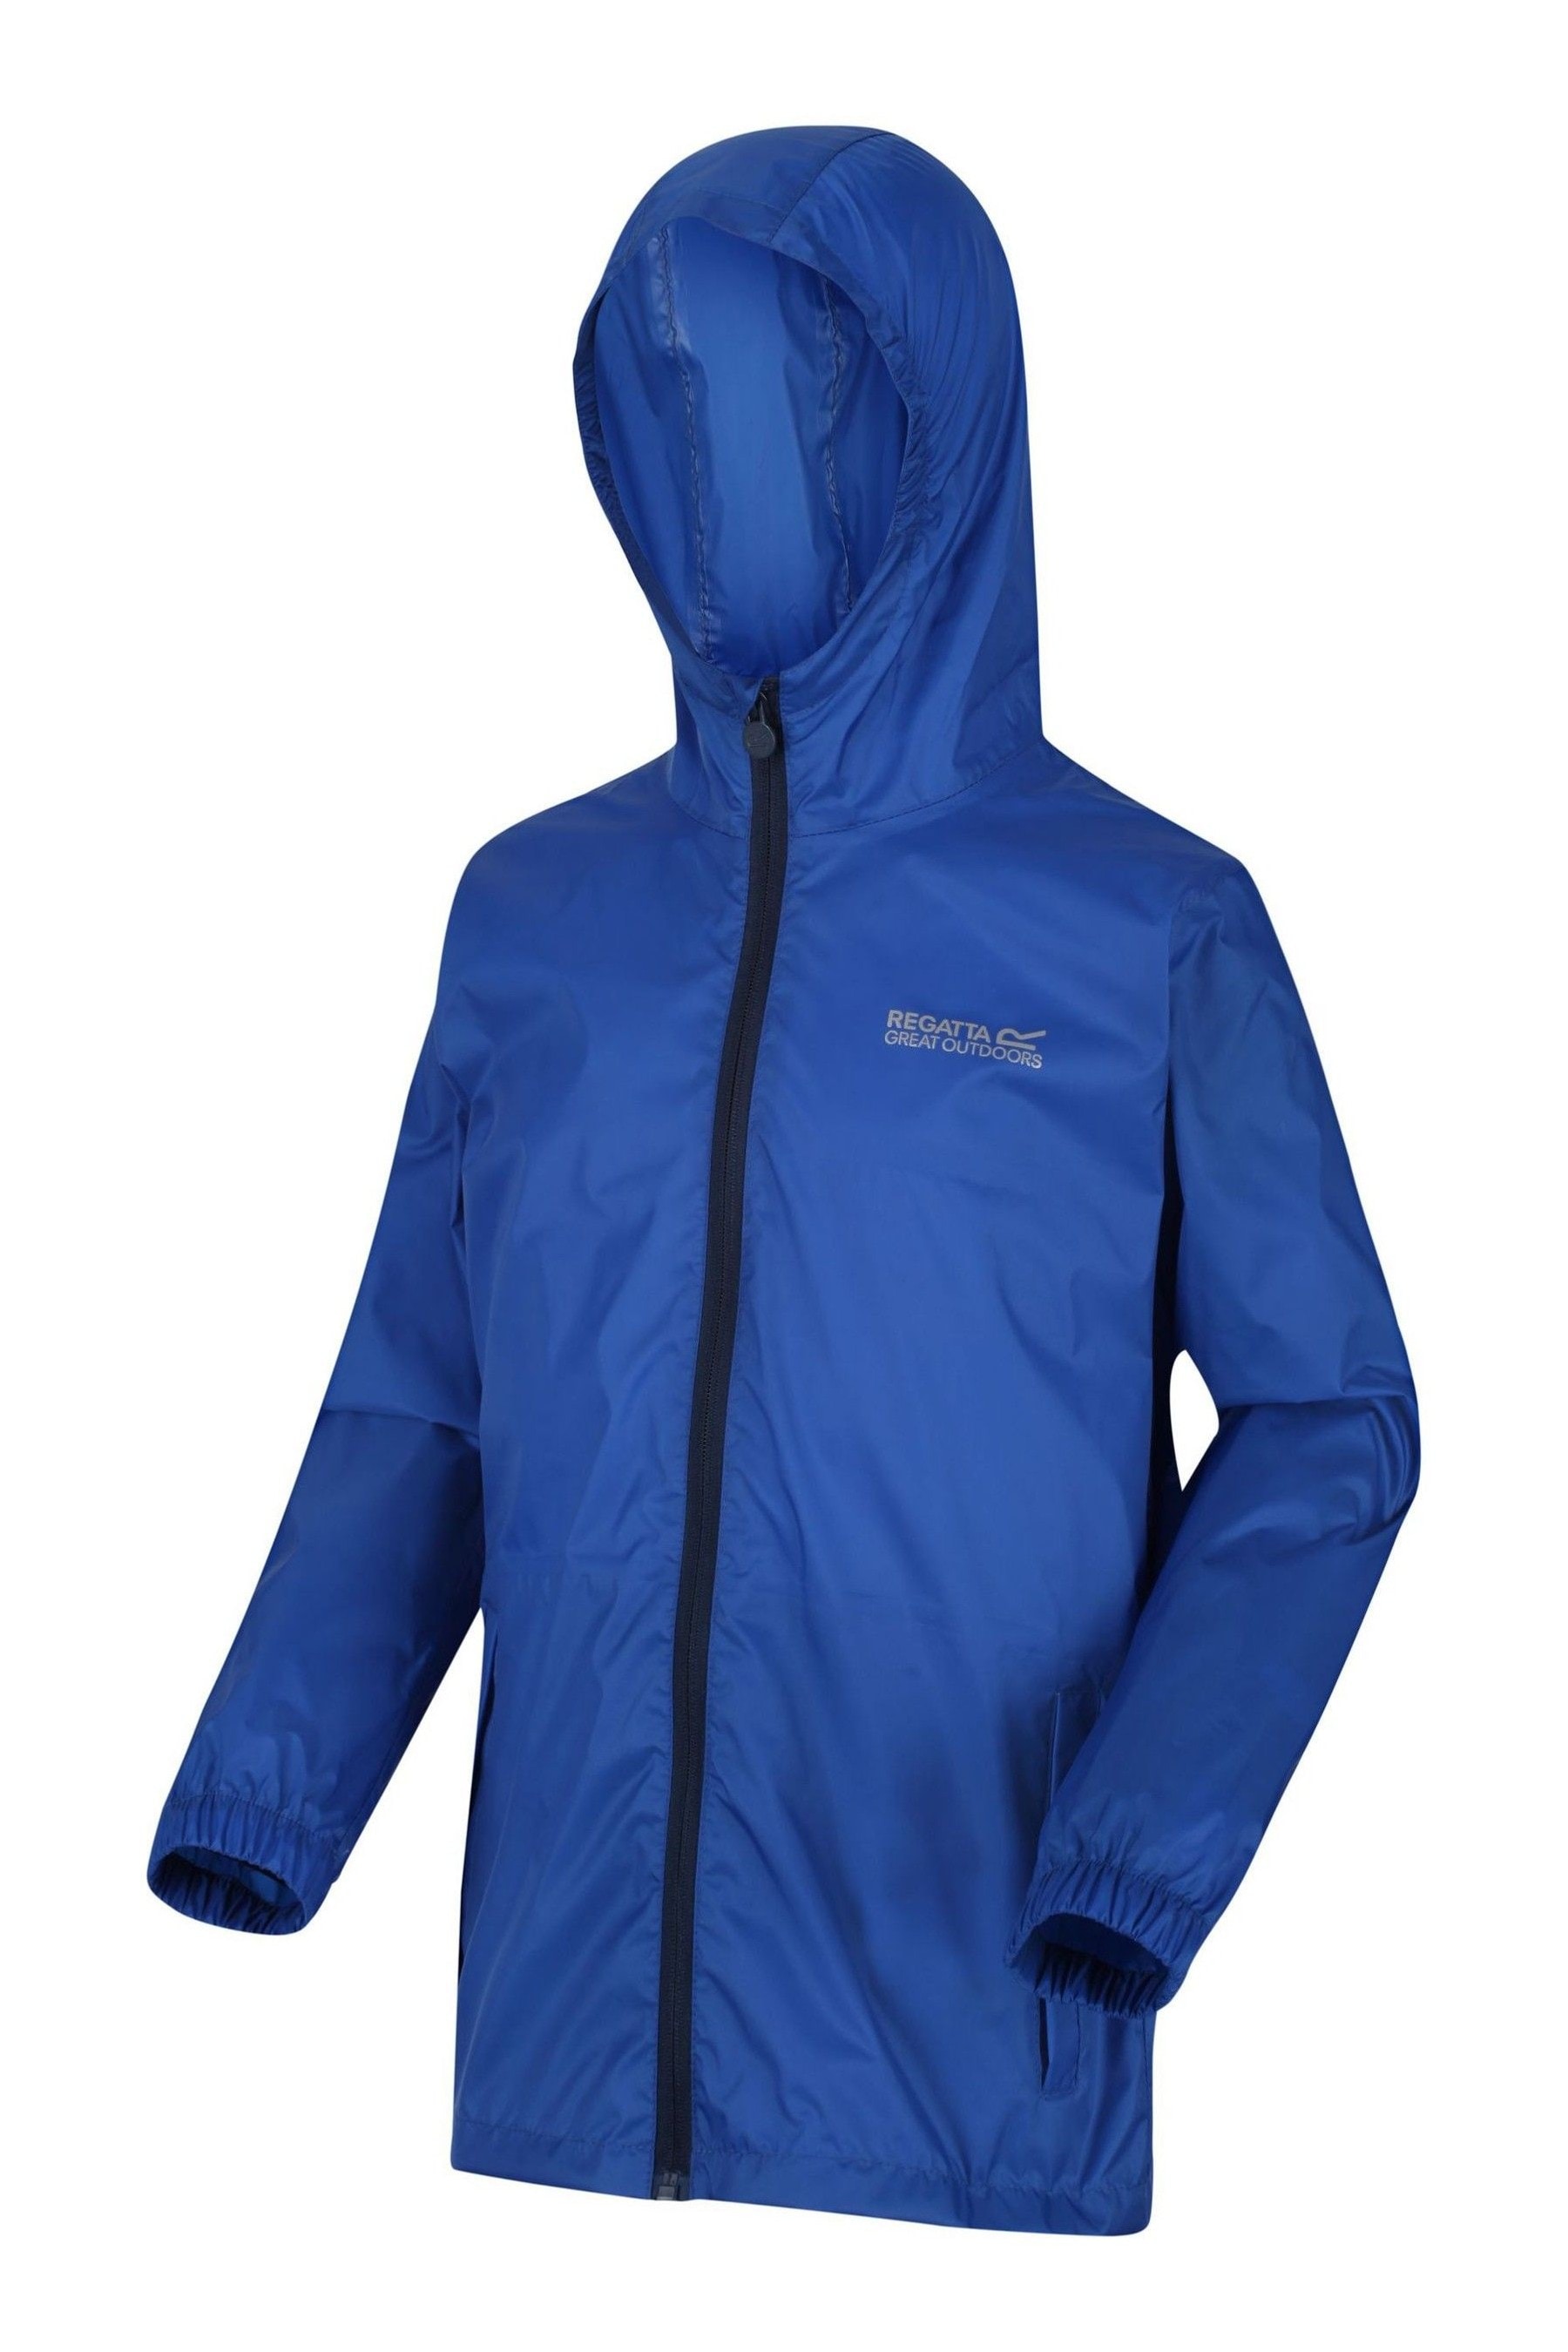 Buy Regatta Kids Pack It Waterproof & Breathable Puddle Jacket from ...